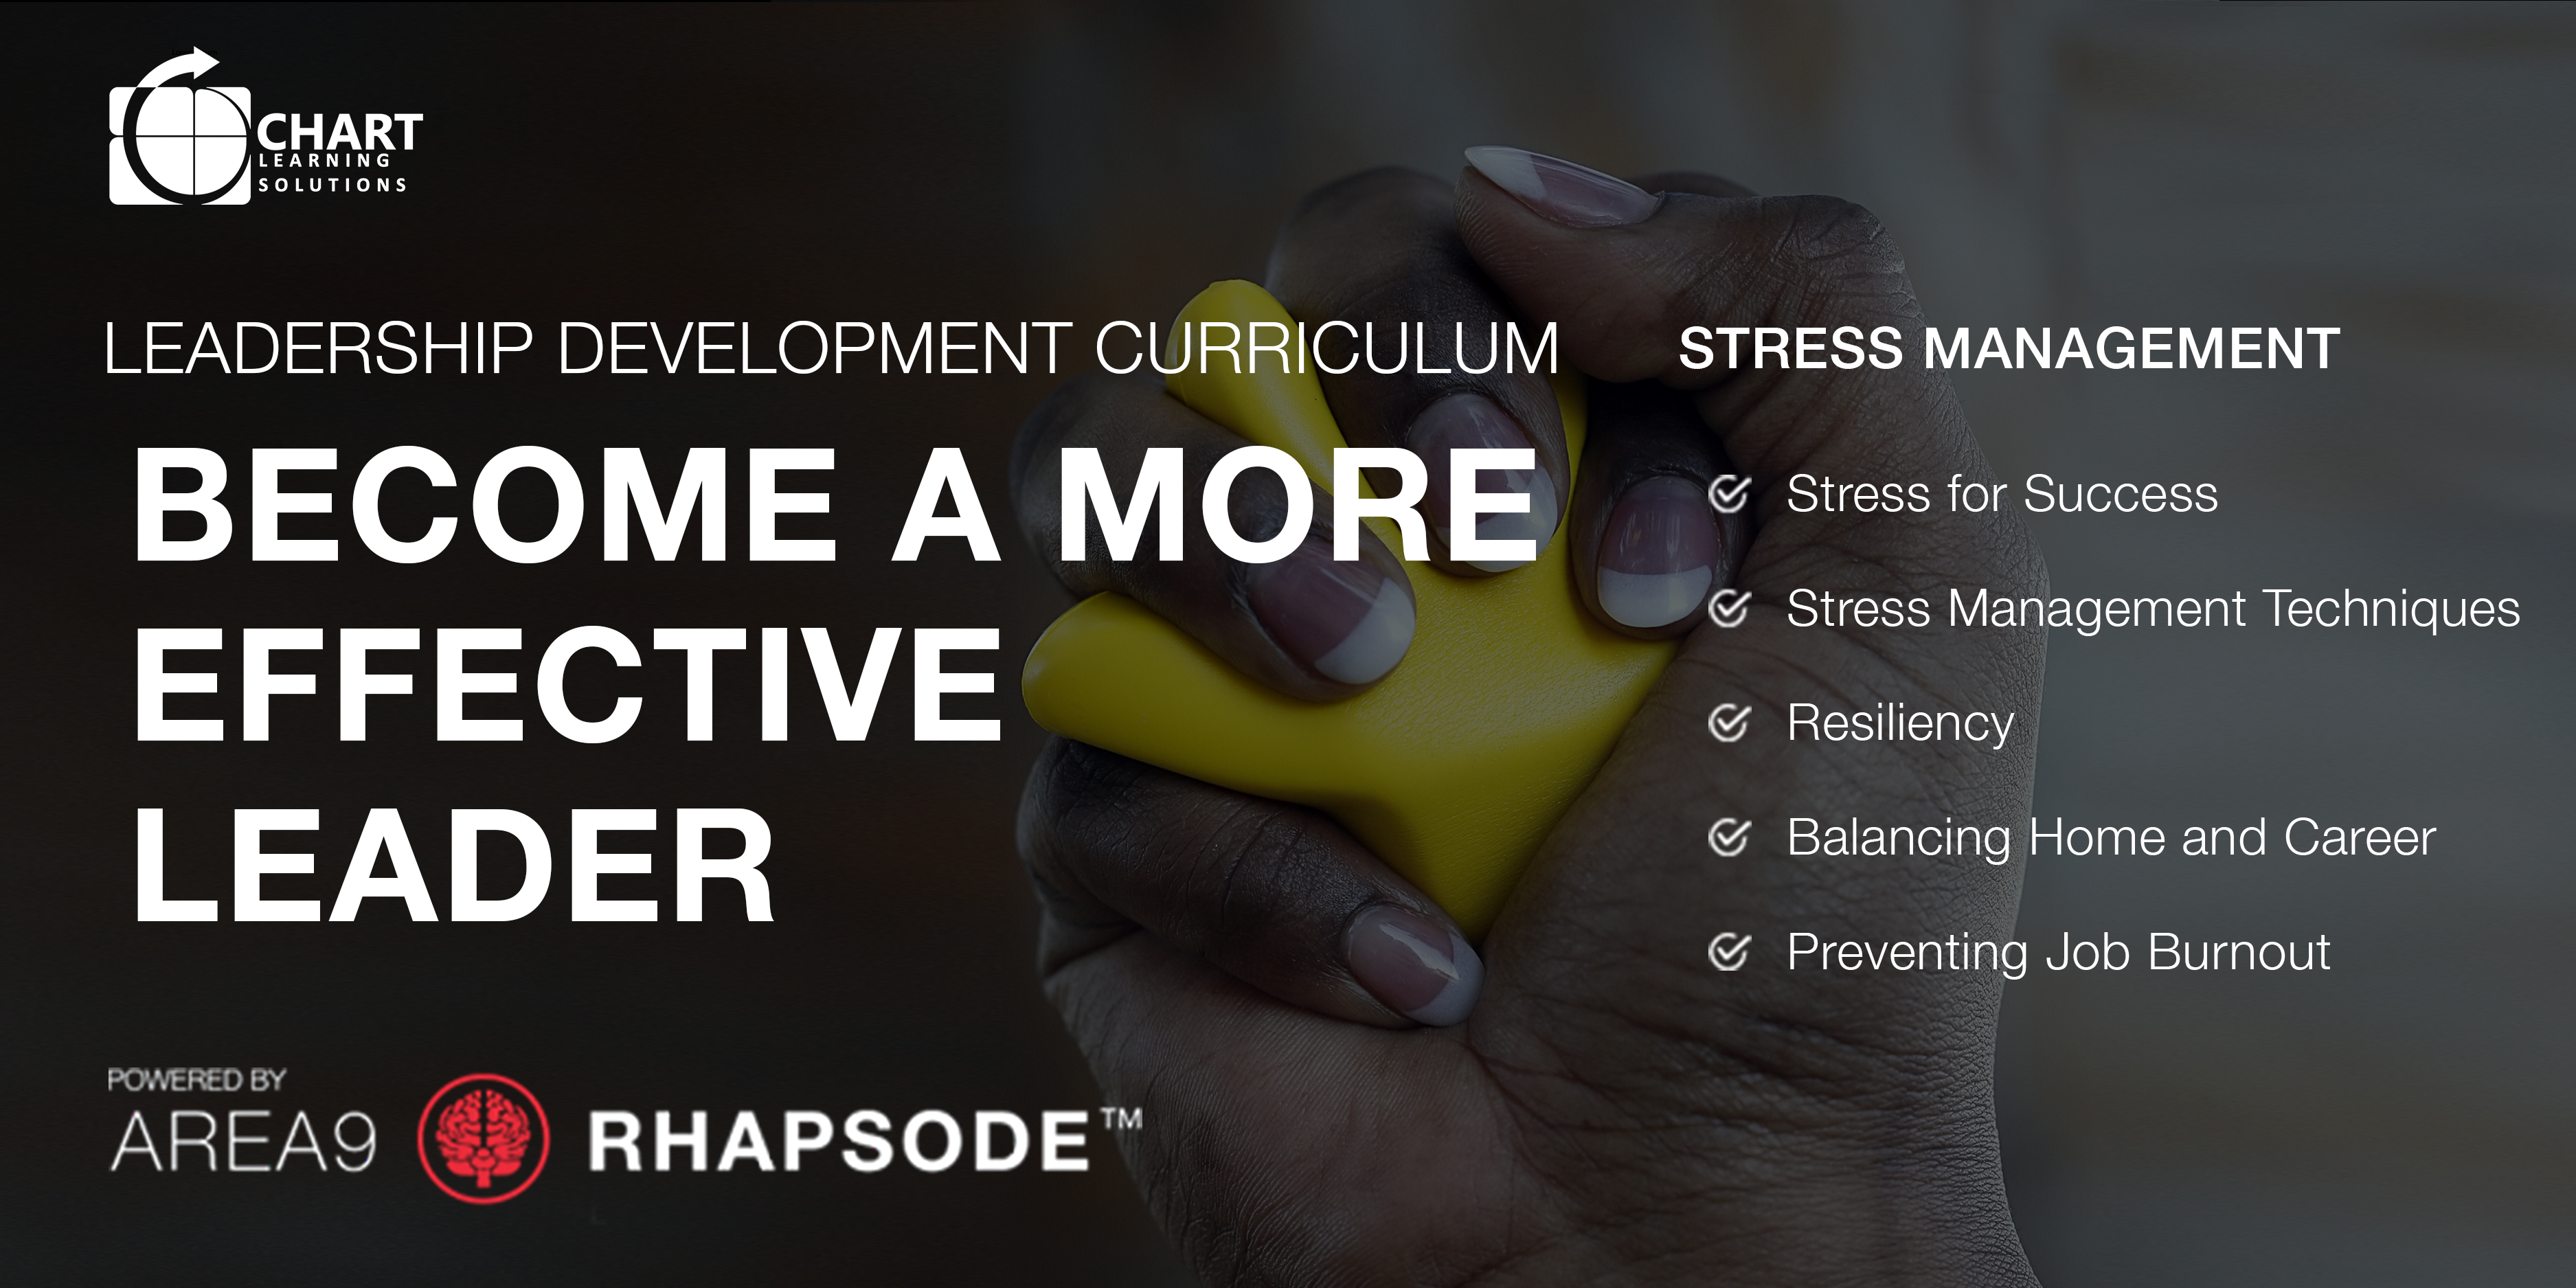 Stress Management for Leaders from the Adaptive Leadership Development Curriculum. Covering: Stress for Success, Stress Management Techniques, Resiliency, Balancing Home and Career, and Preventing Job Burnout